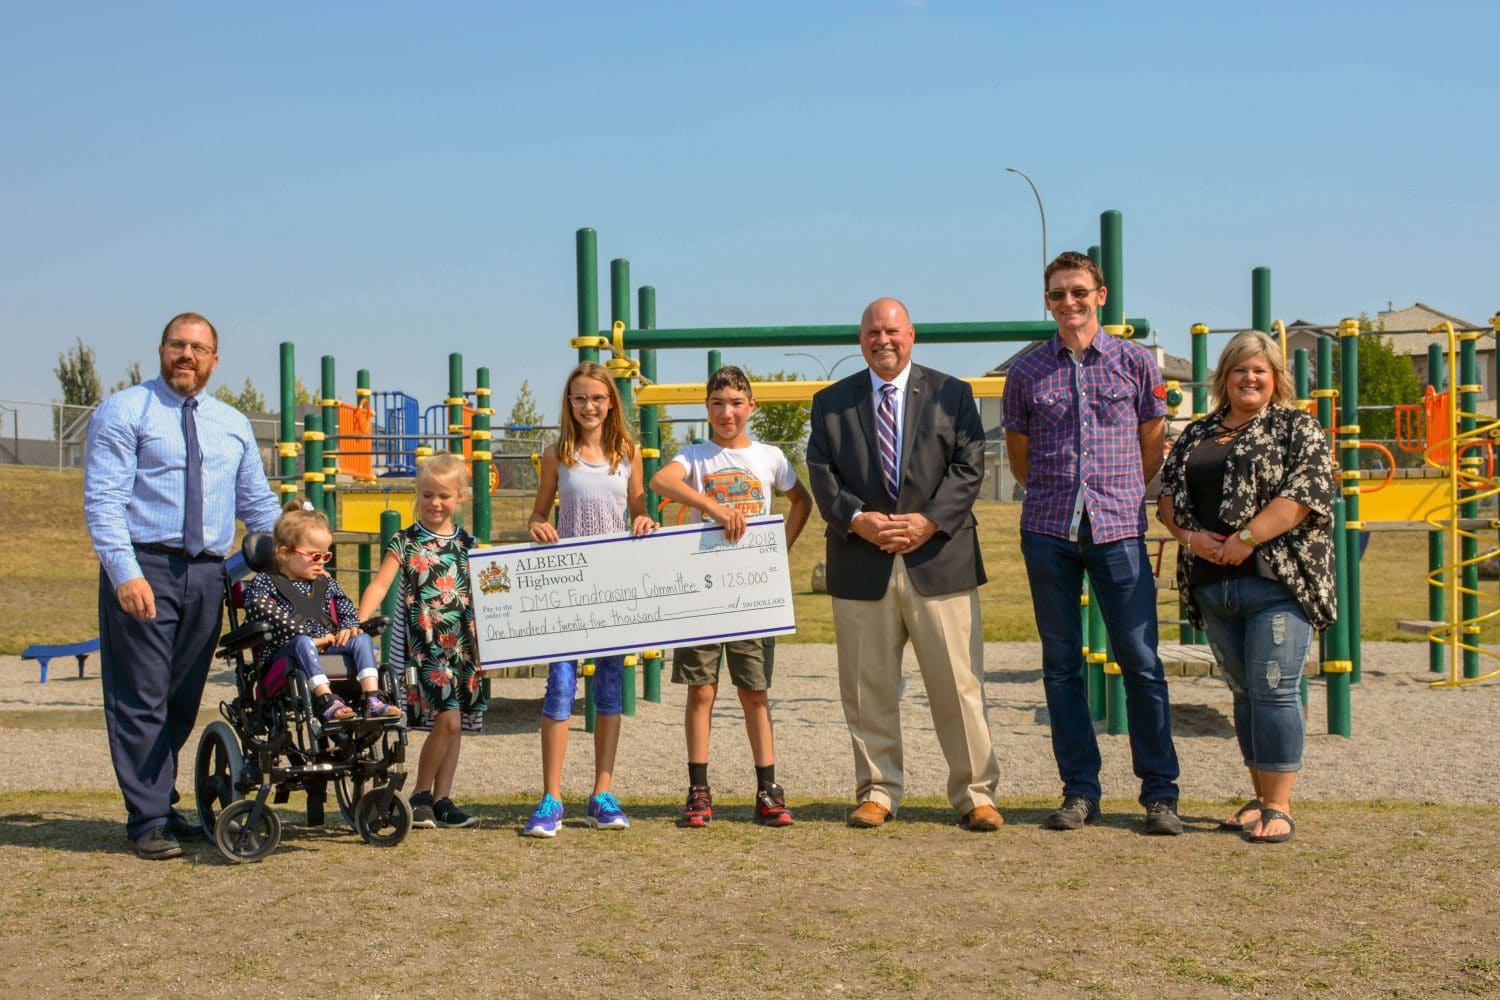 Dr. Morris Gibson School is Getting an Inclusive Playground!